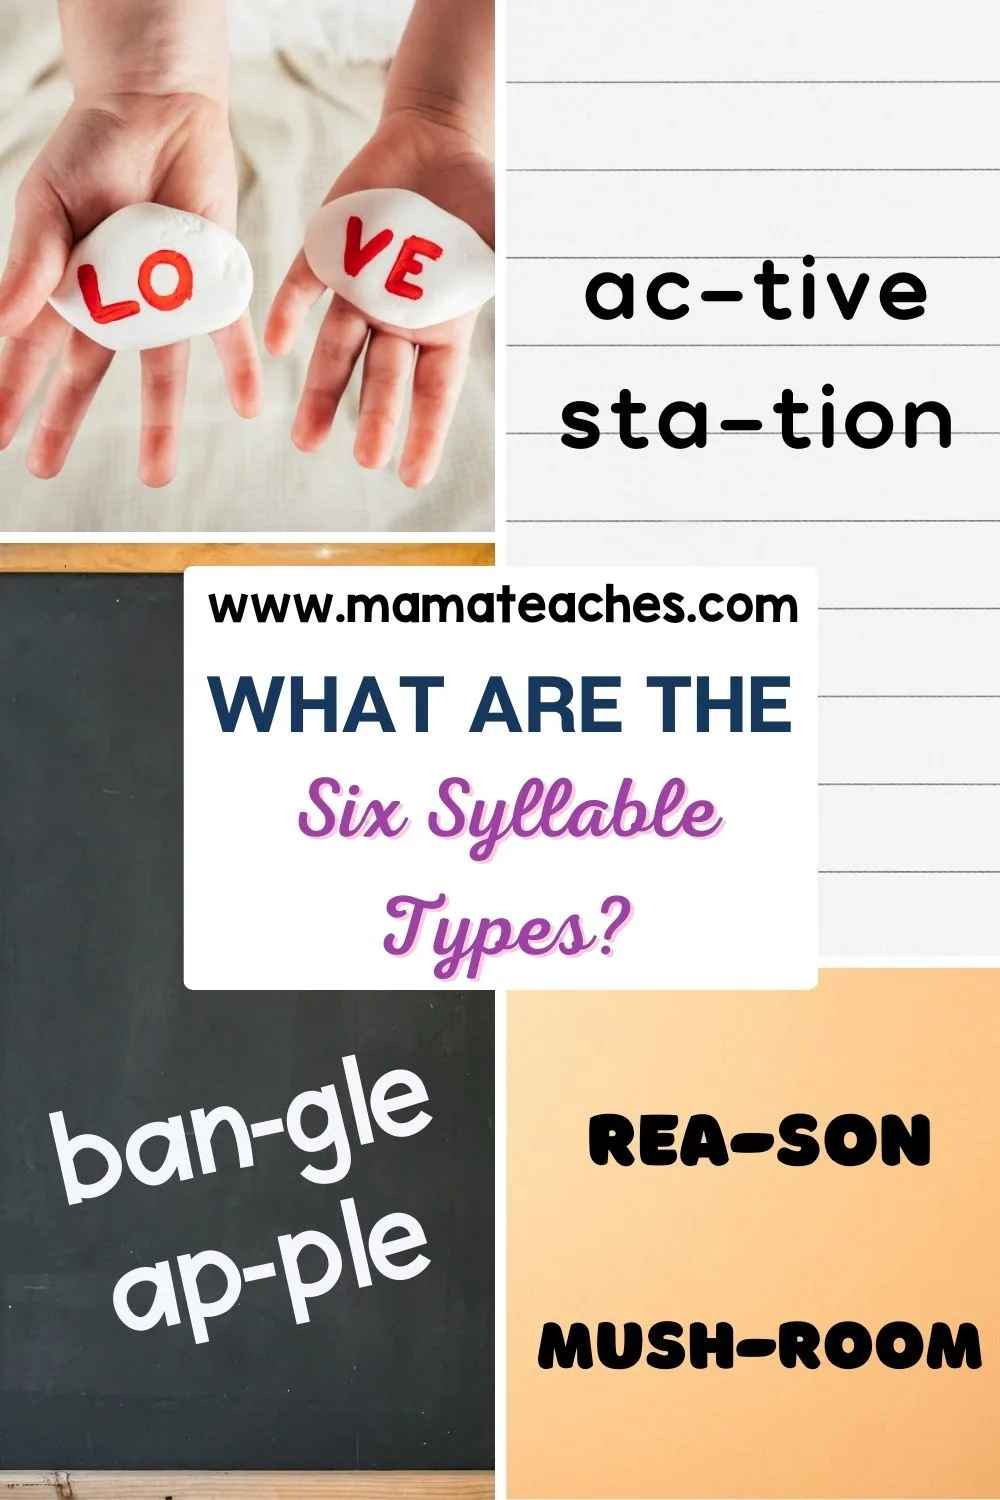 What are the Six Syllable Types